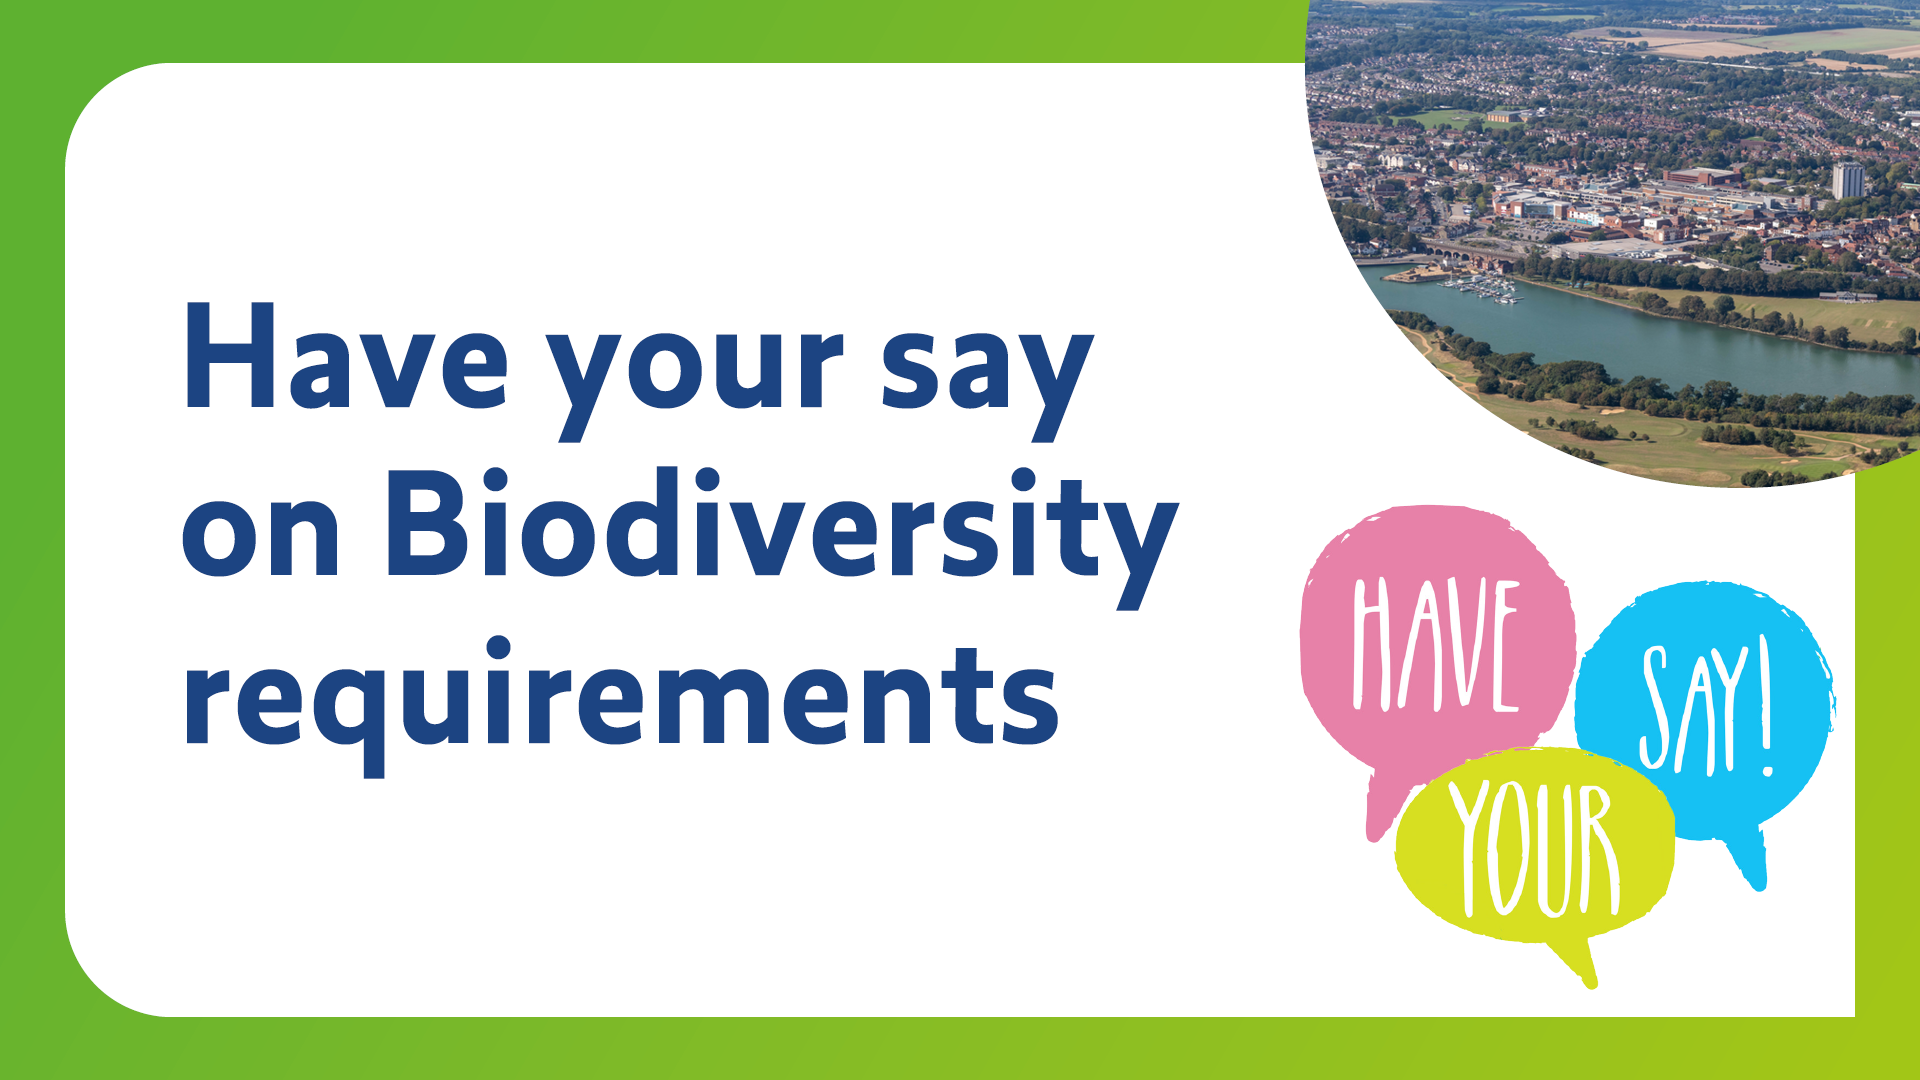 Have your say on Biodiversity requirements